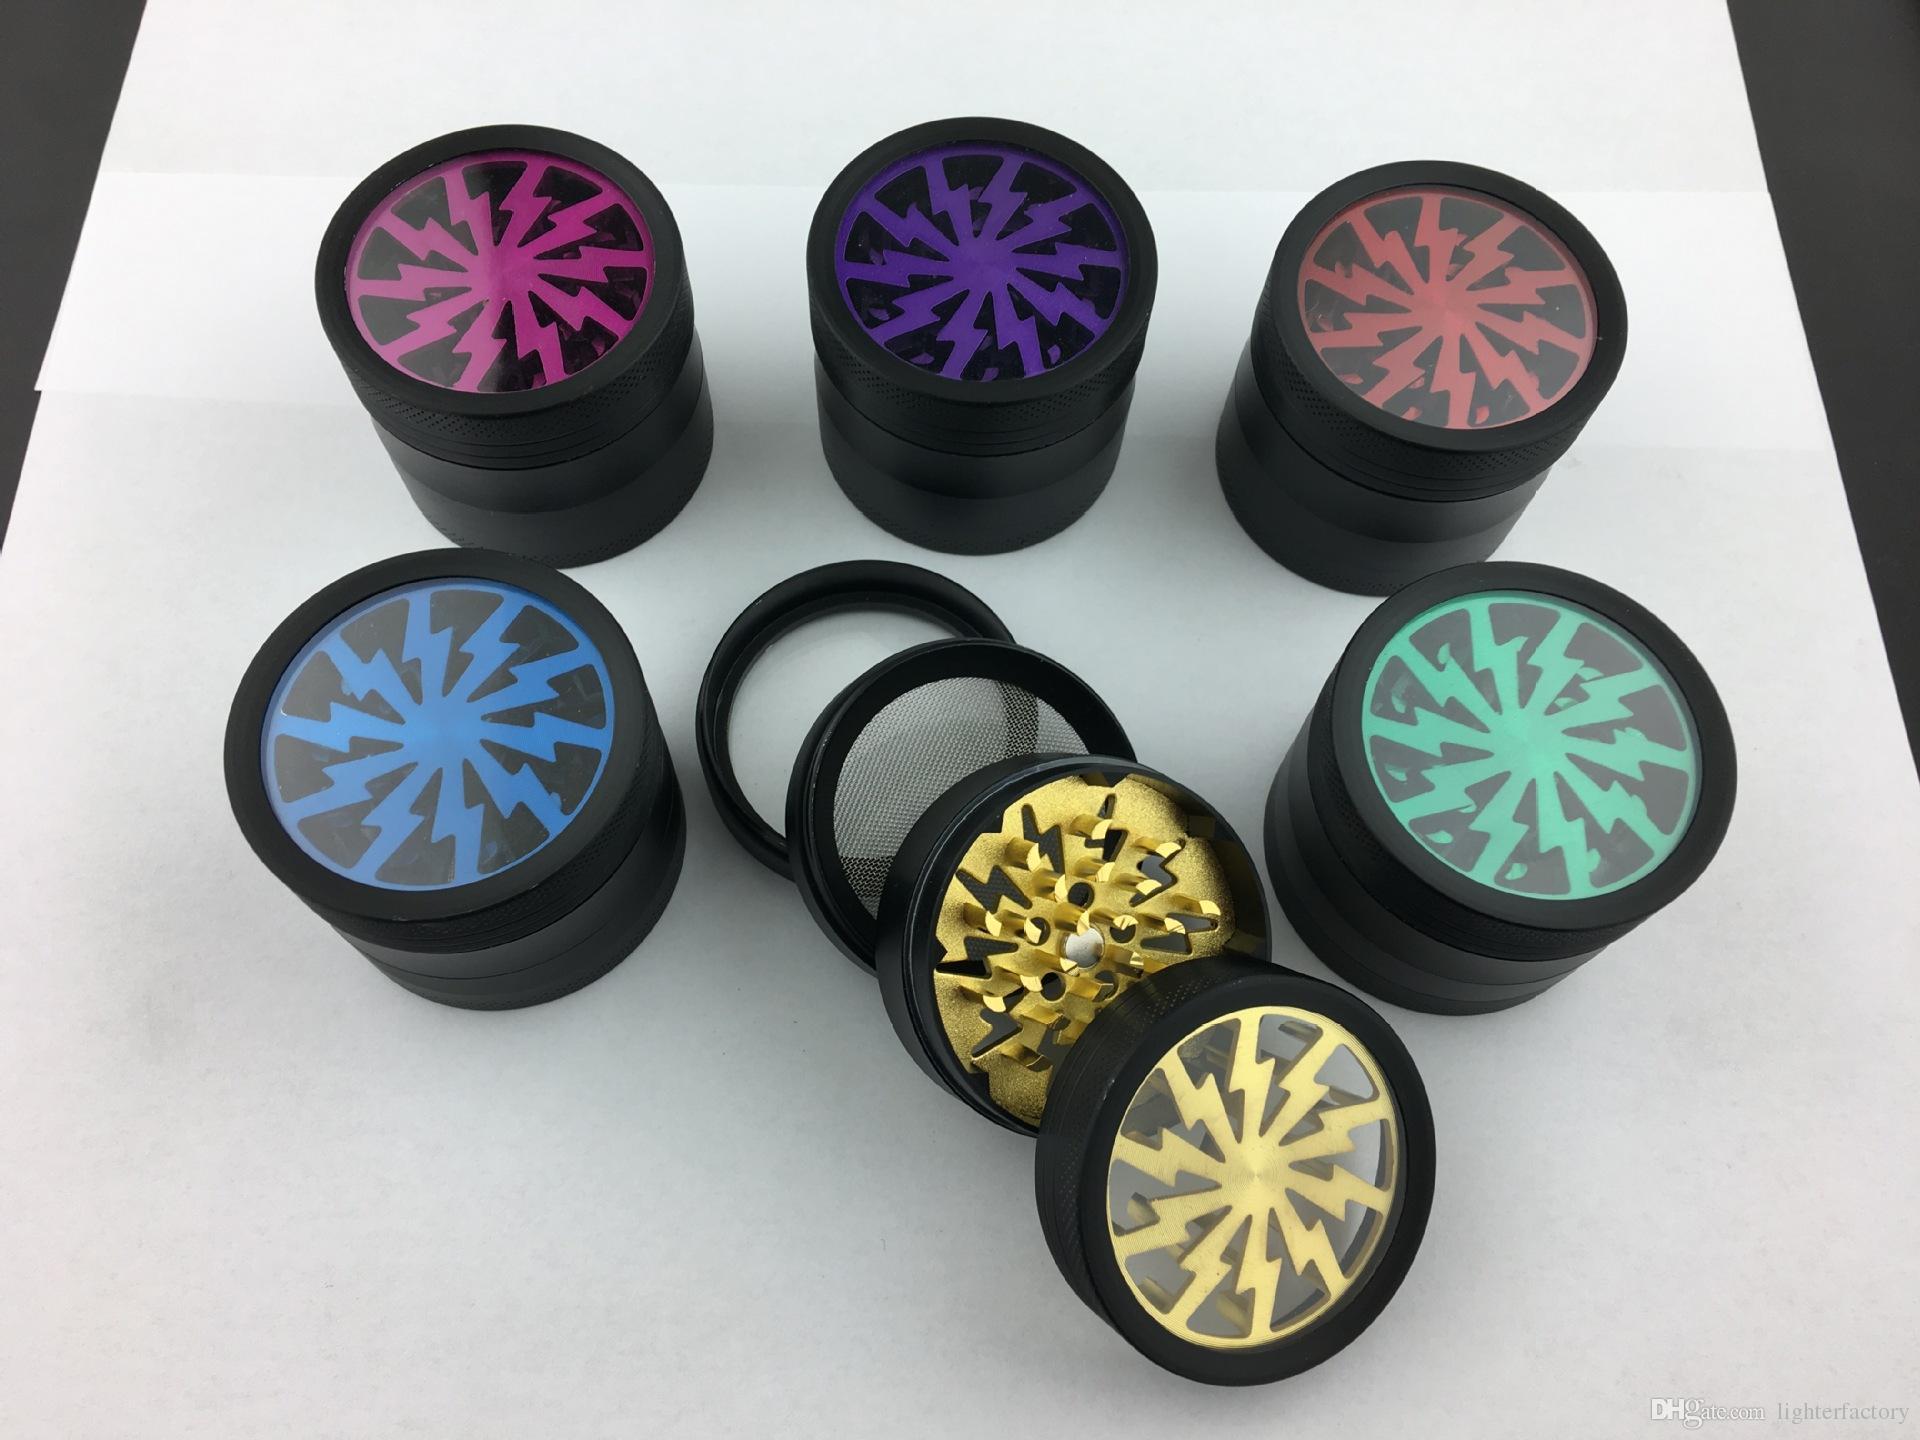 

Tobacco Smoking Herb Grinders Four Layers Aluminium Alloy Grinder 100% Metal dia 63mm have 5 colors With Clear Top Window Lighting Grinder